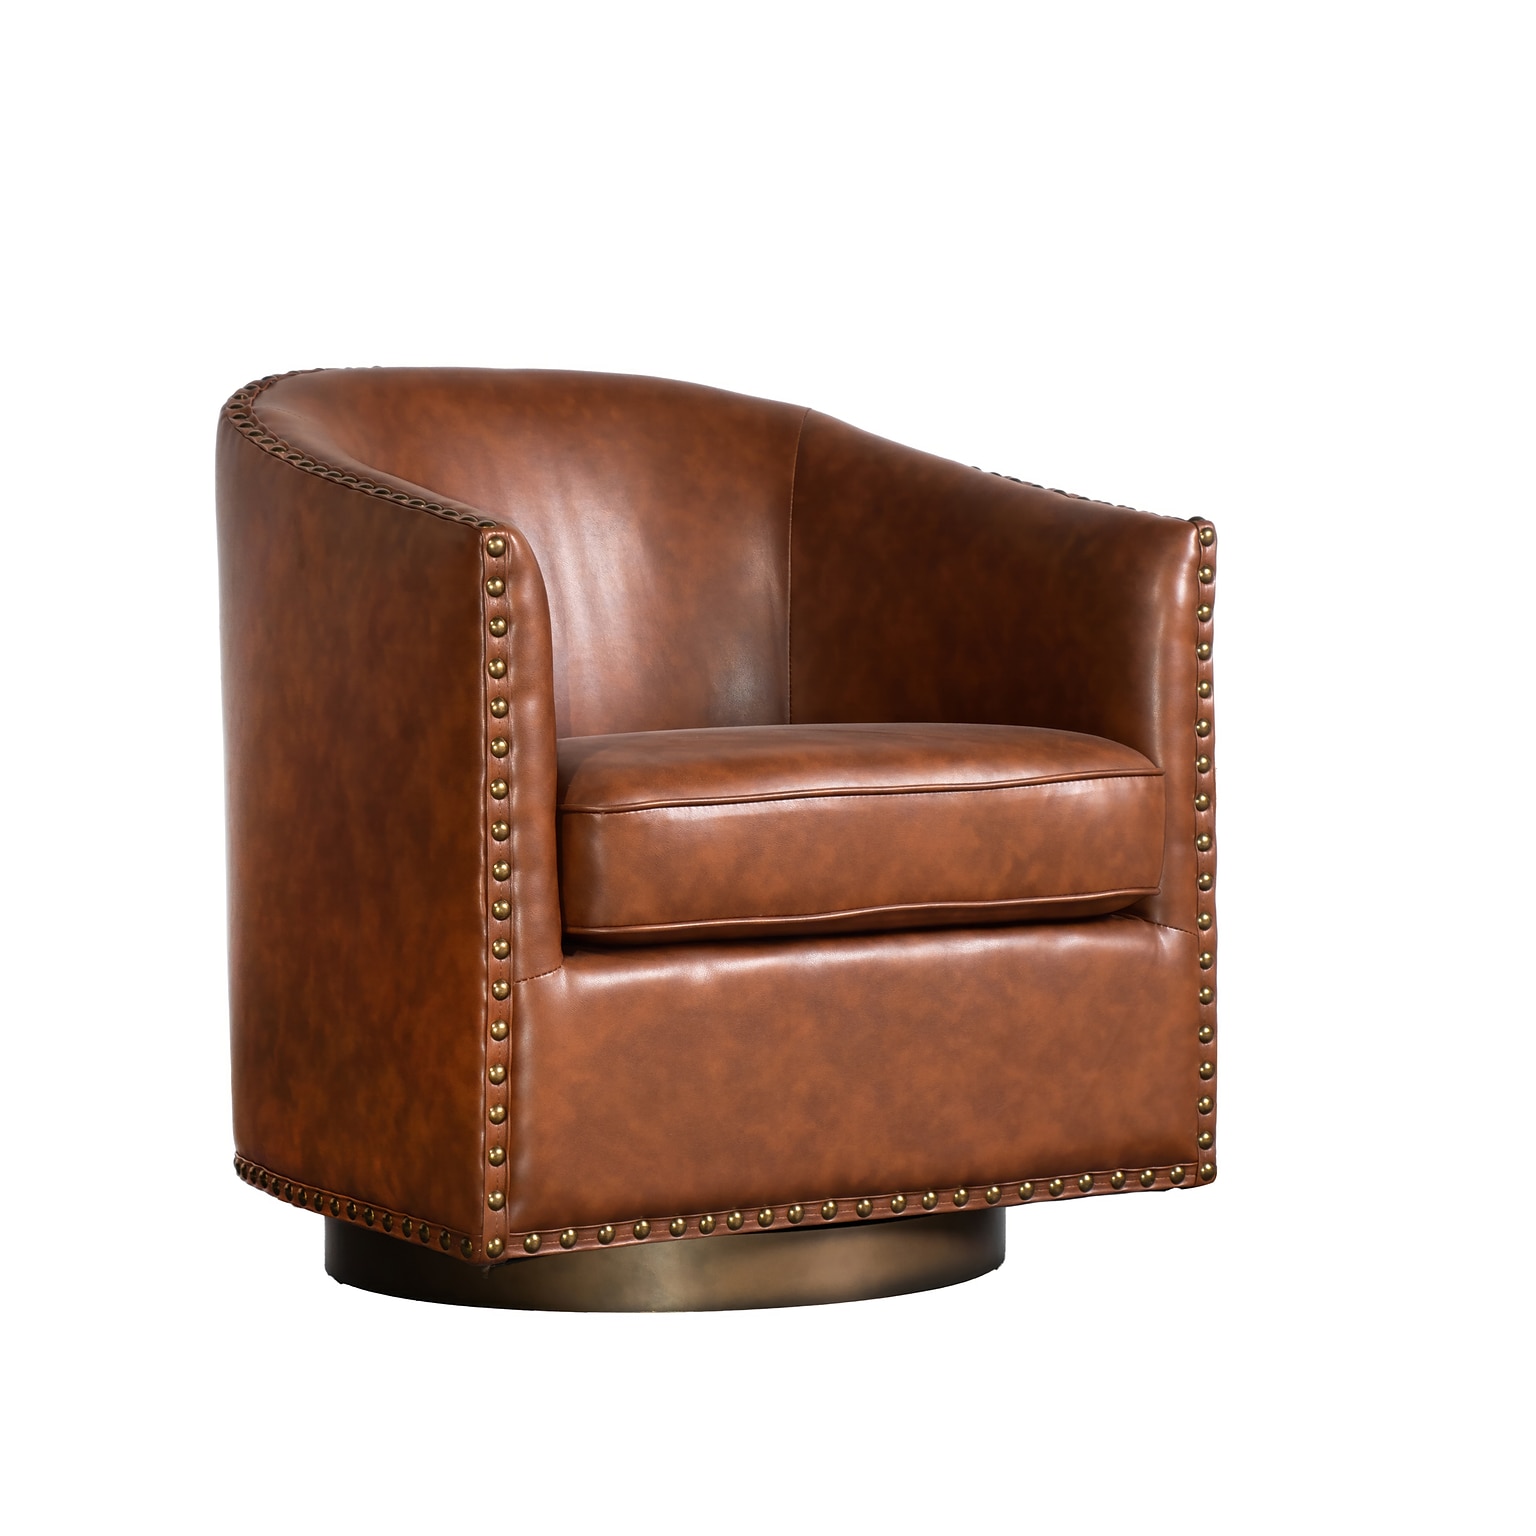 Flash Furniture Myles Leathersoft Upholstery Club Style Barrel Accent Armchair, Brown (BSAC22061BRNPU)